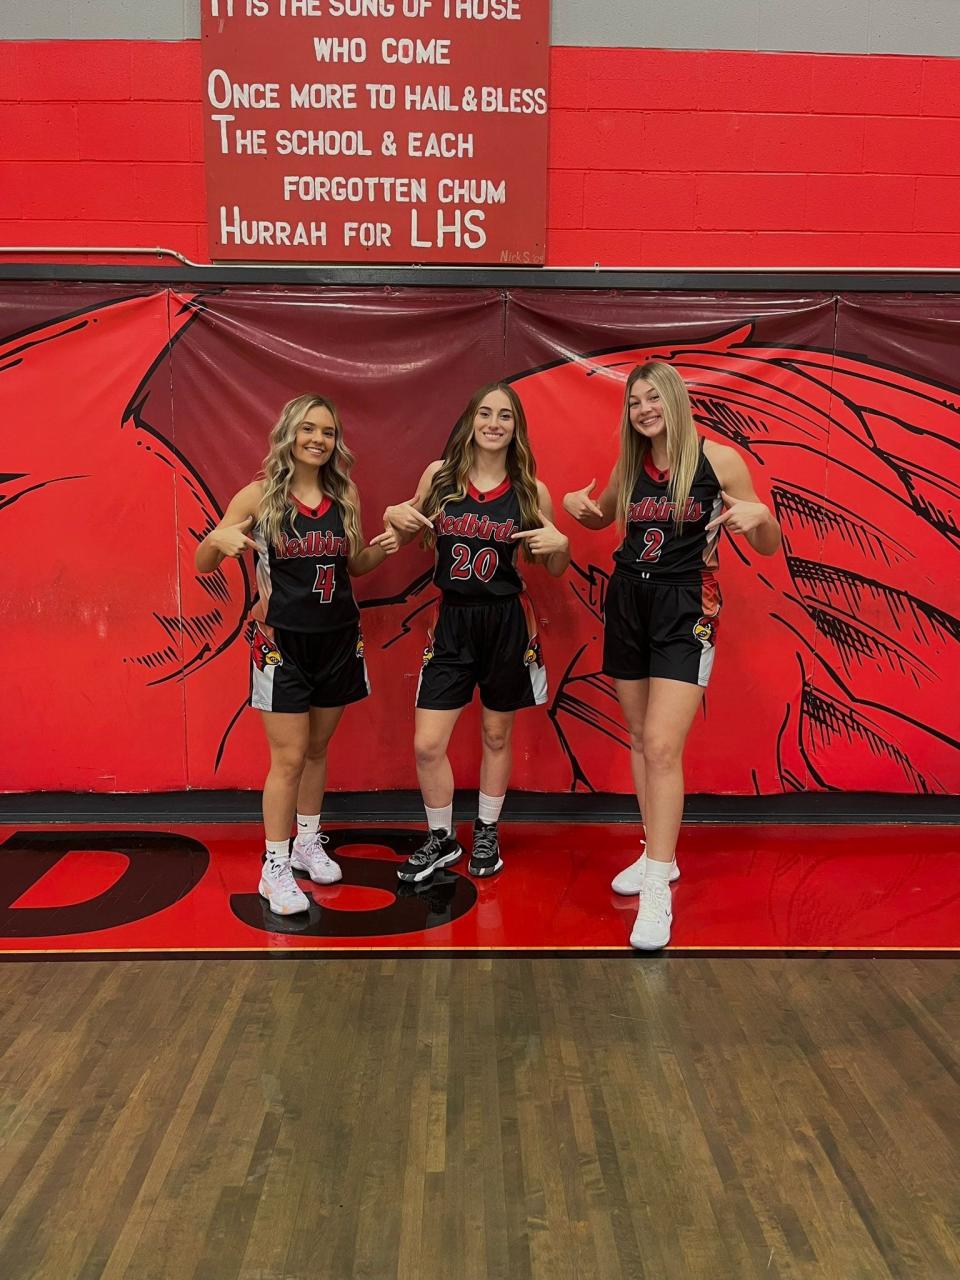 From left to right, Jena Guilliams, Sophia Spangler and Corri Vermilya pose together in their uniforms on Team Picture Day.